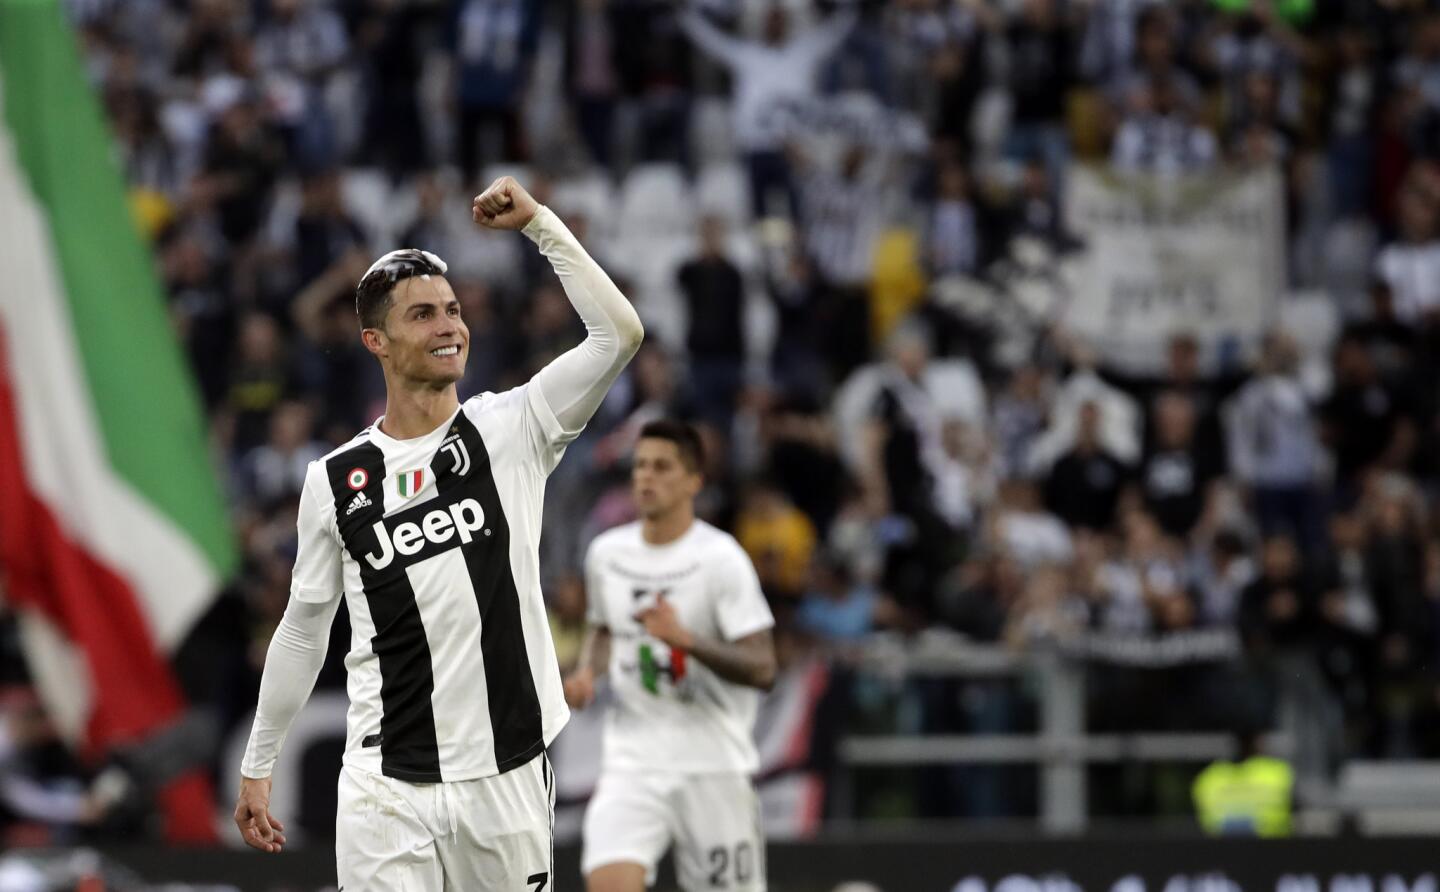 Juventus' Cristiano Ronaldo celebrates at the end of a Serie A soccer match between Juventus and AC Fiorentina, at the Allianz stadium in Turin, Italy, Saturday, April 20, 2019. Juventus clinched a record-extending eighth successive Serie A title, with five matches to spare, after it defeated Fiorentina 2-1. (AP Photo/Luca Bruno)